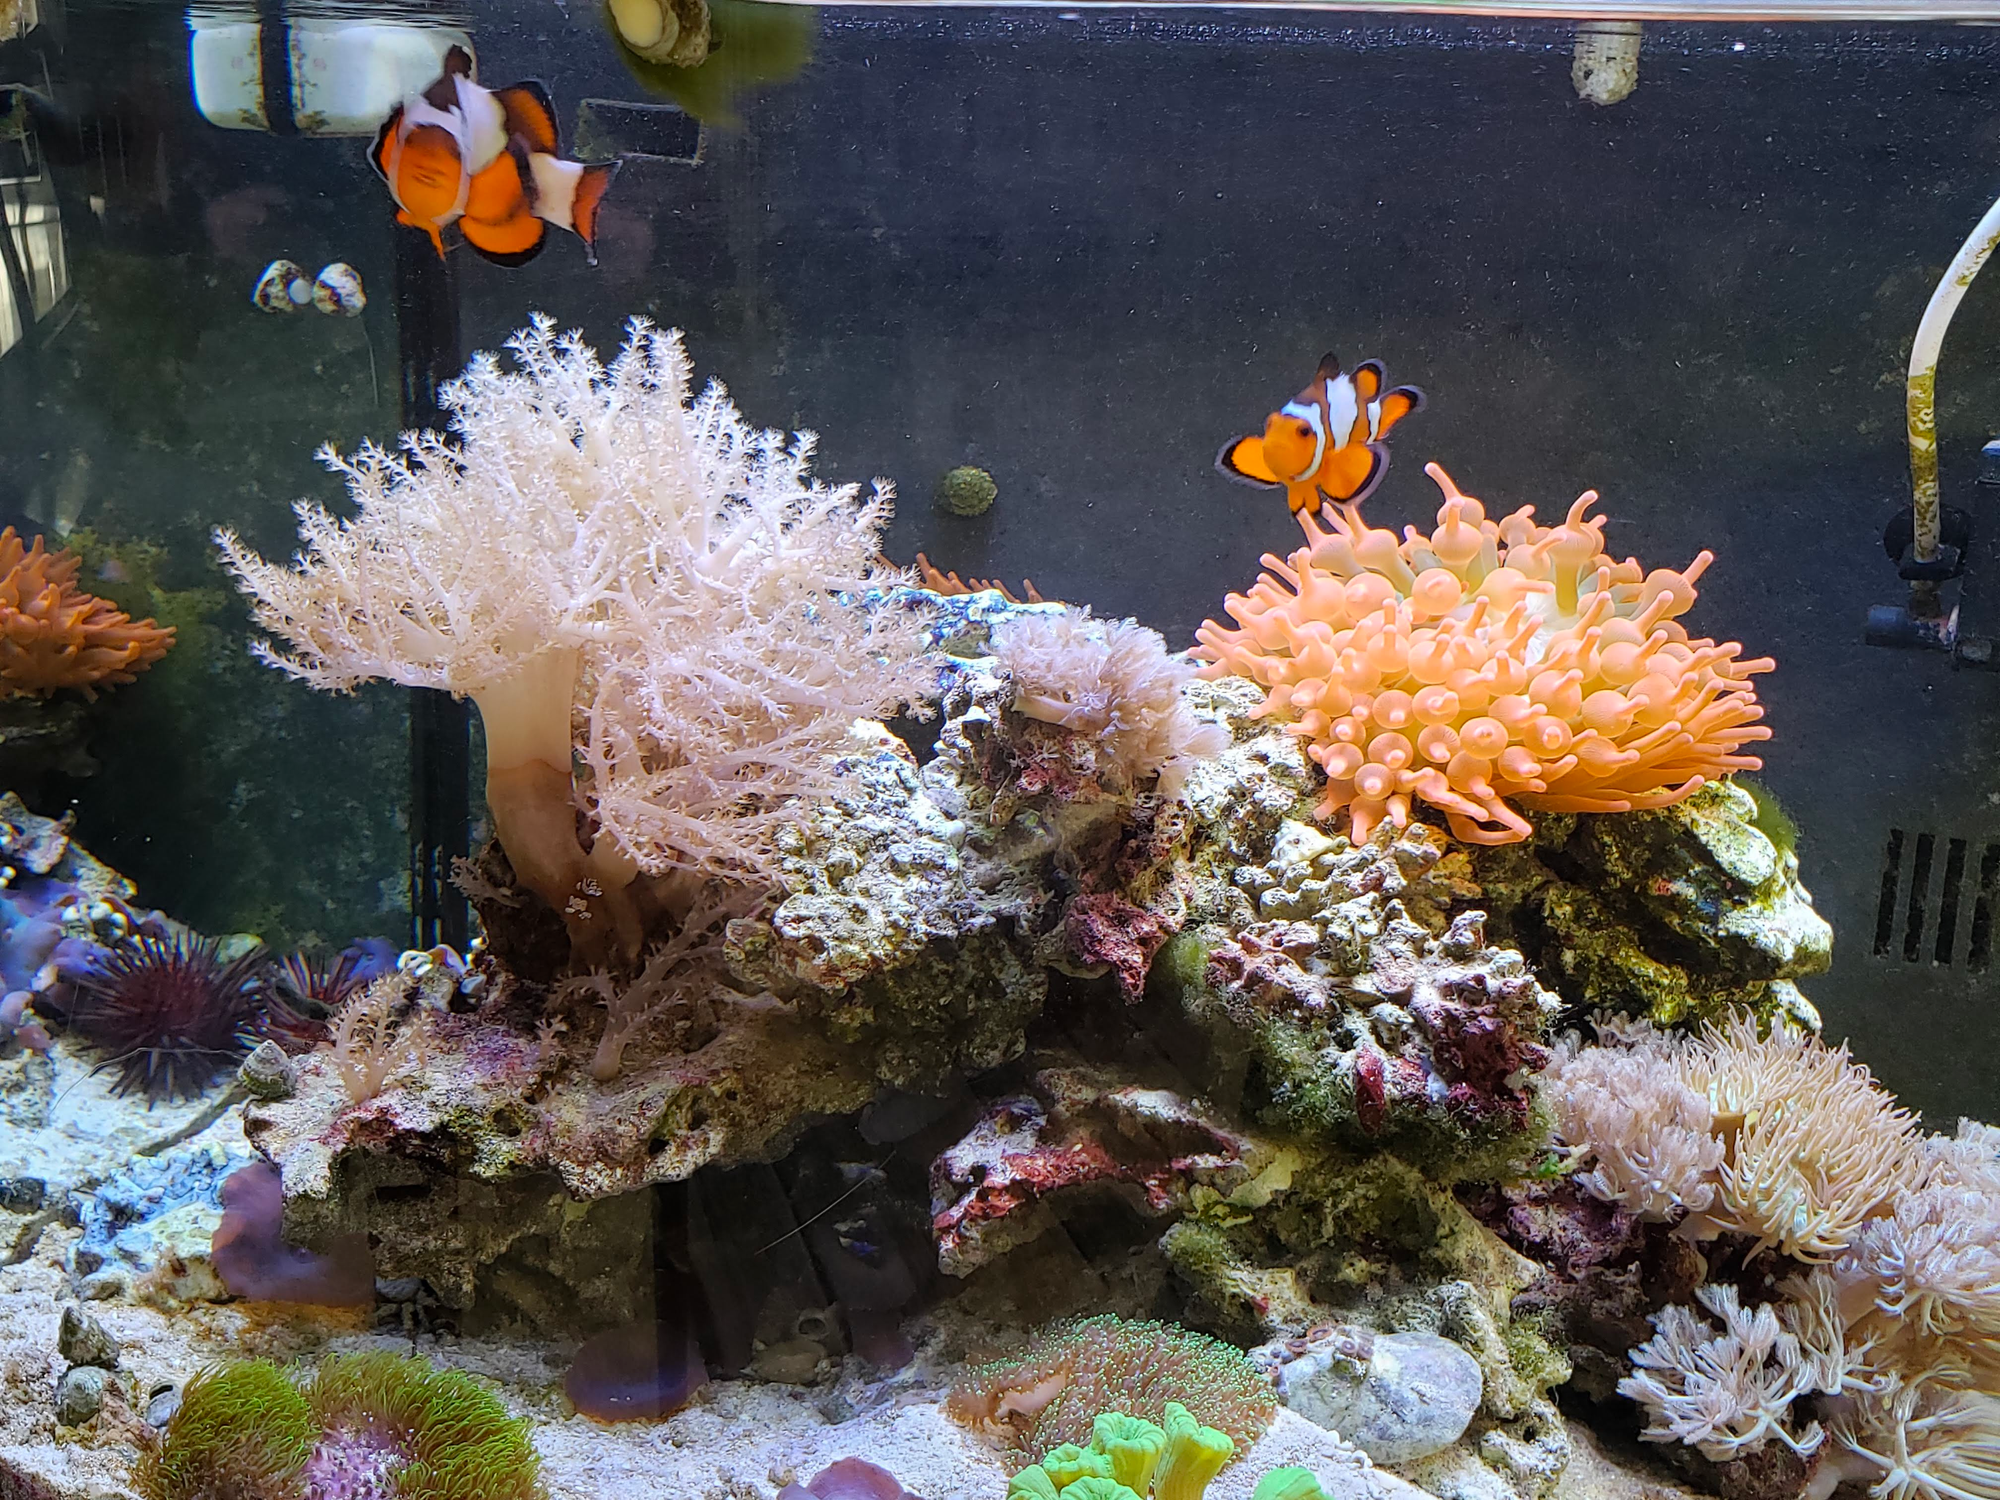 Two orange and white striped clown fish. Below them are brightly colored corals on a mound of rocks.